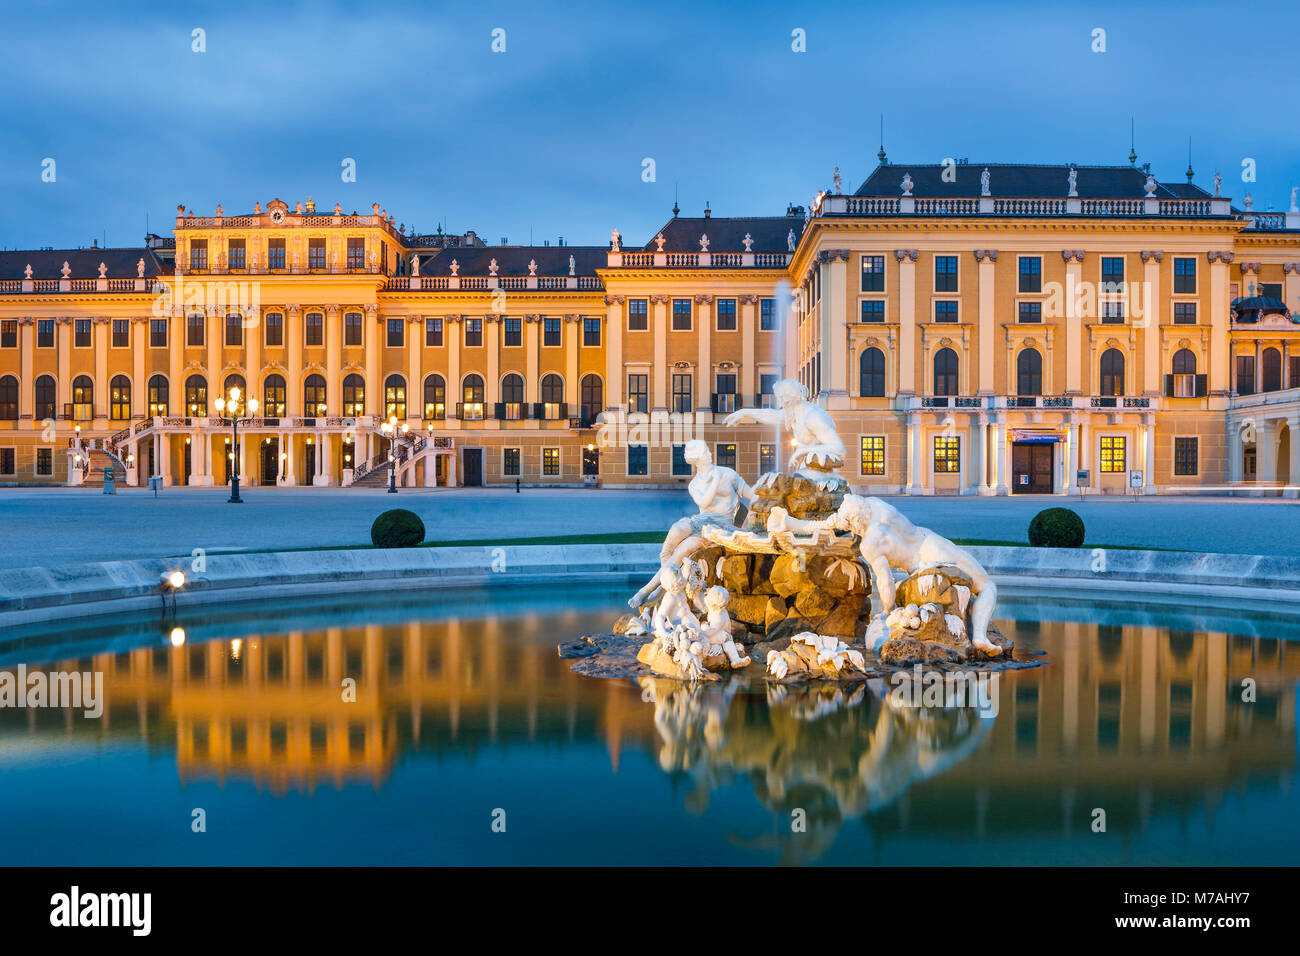 Blue hour with reflexion in the fountain on the forecourt of Schönbrunn Palace in Vienna Stock Photo